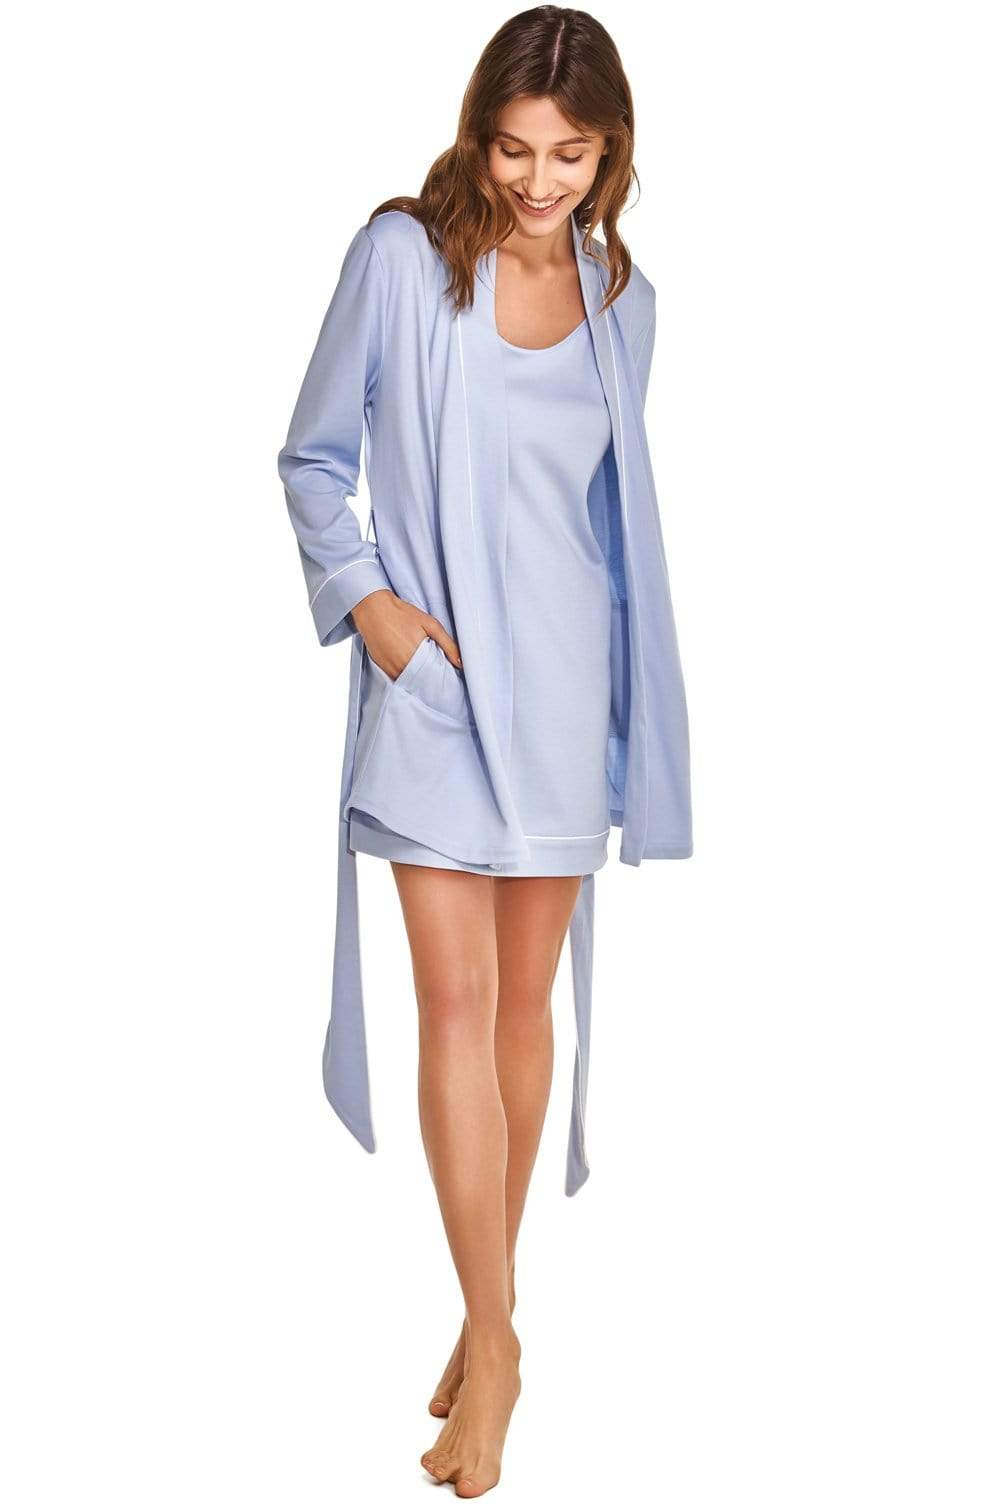 Slow Nature® Essentials Sleep & Loungewear ROBE in Organic Cotton. sustainable fashion ethical fashion